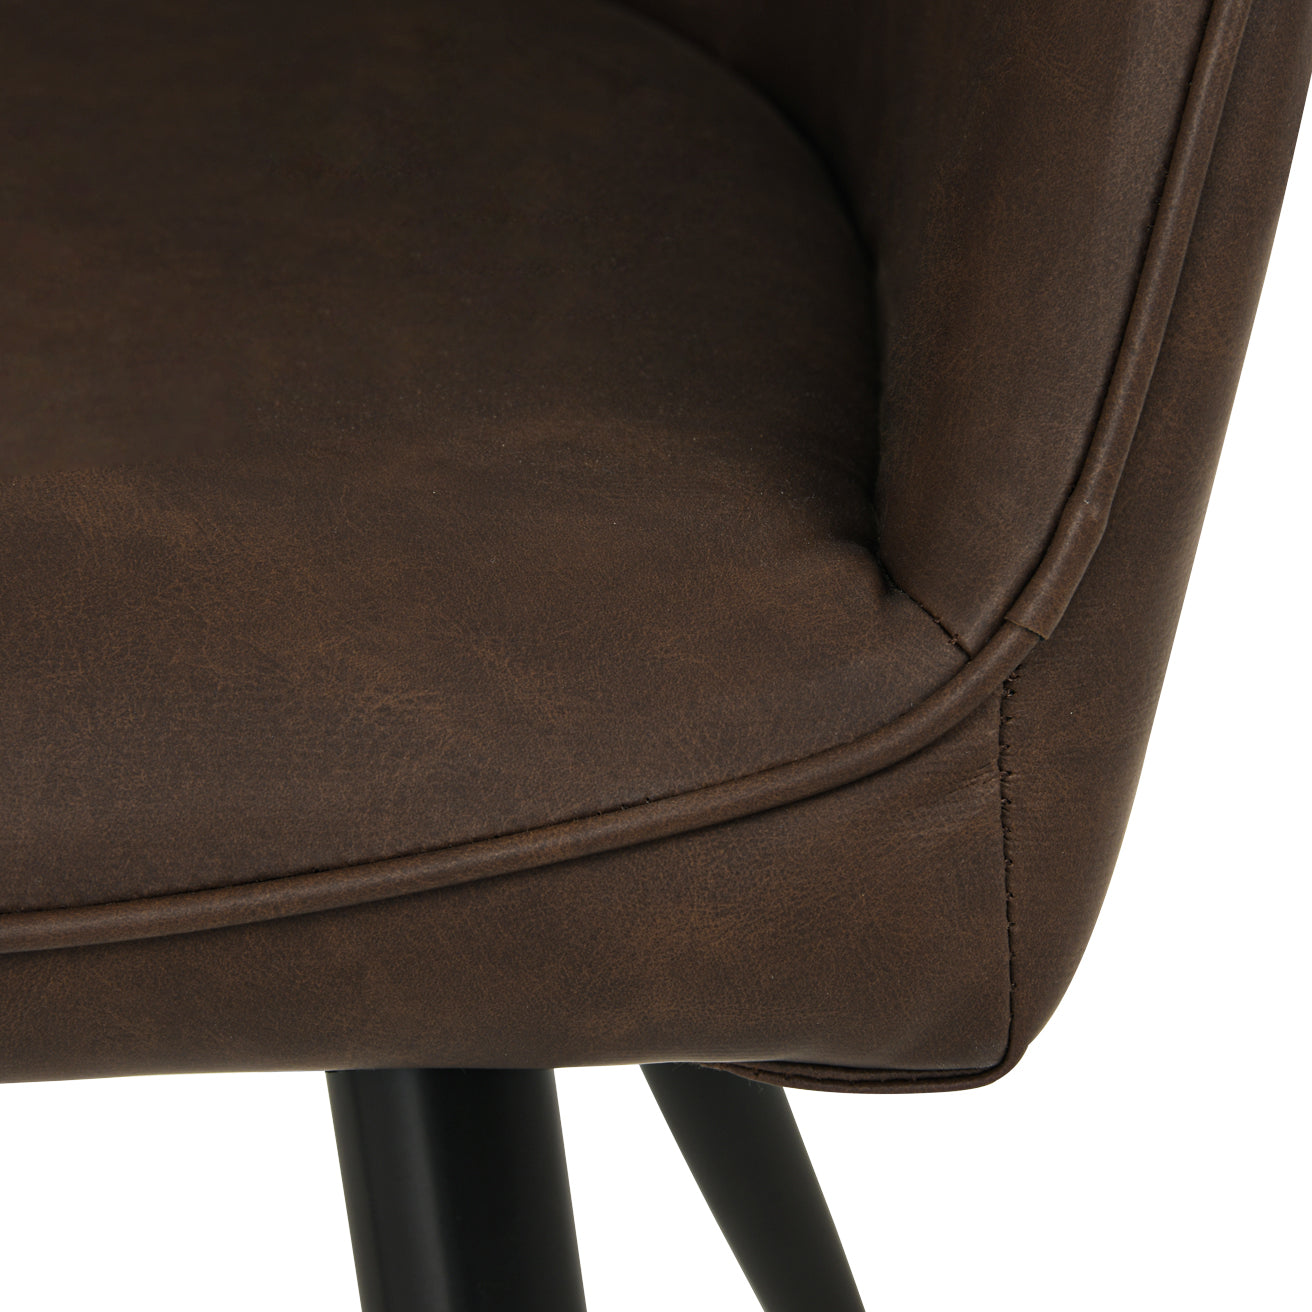 Sienna Dining Chairs [Set of 2] [Pu Leather]